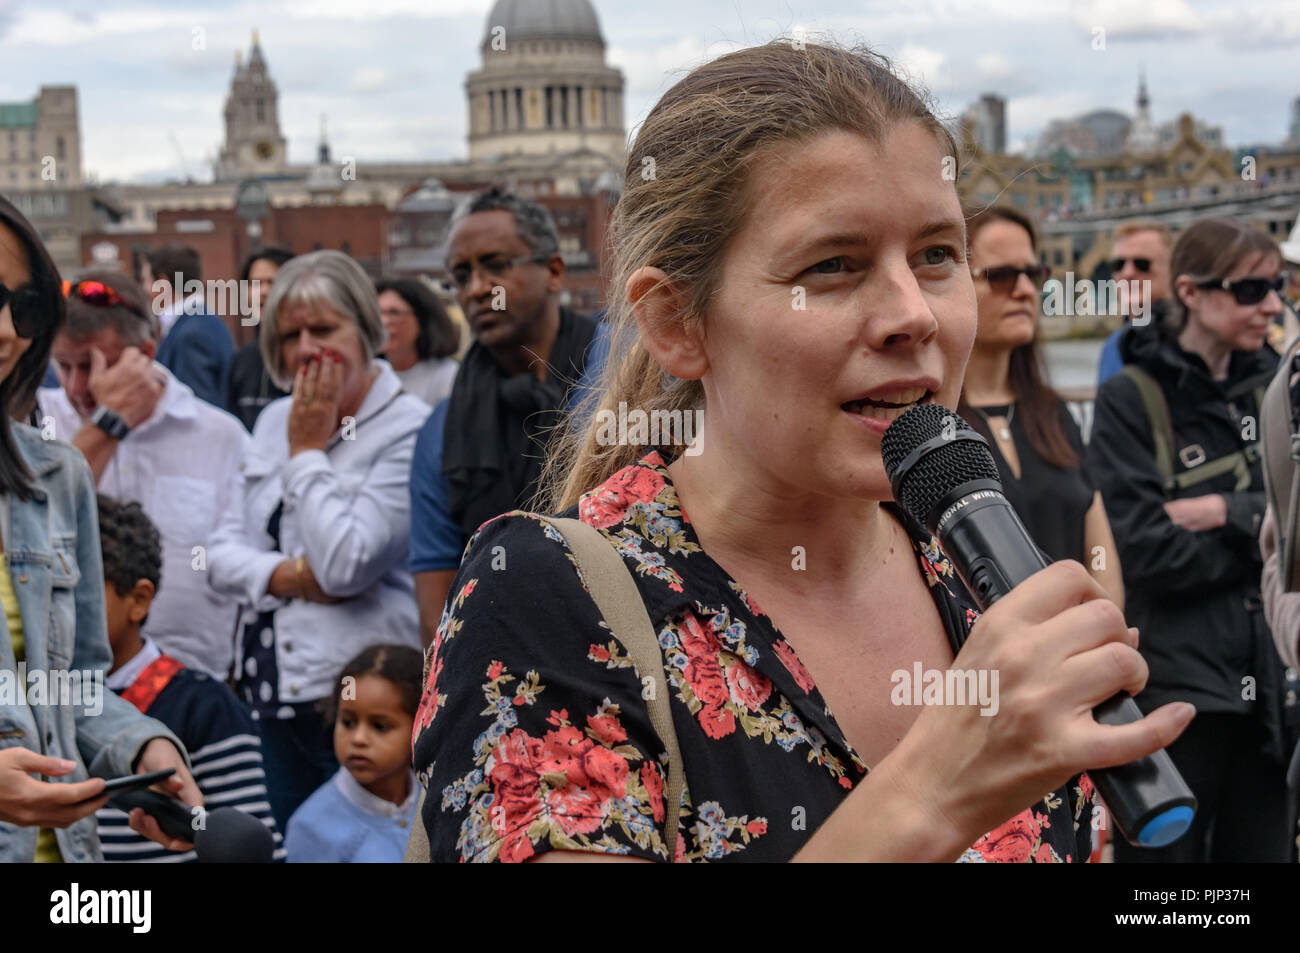 London, UK. 8th September 2018. Claire from Campaign Against Climate Change speaks at the Climate Reality rally in front of Tate Modern, one of thousands around the world demanding urgent action by government leaders to leaders commit to a fossil free world that works for all of us. Credit: Peter Marshall/Alamy Live News Stock Photo